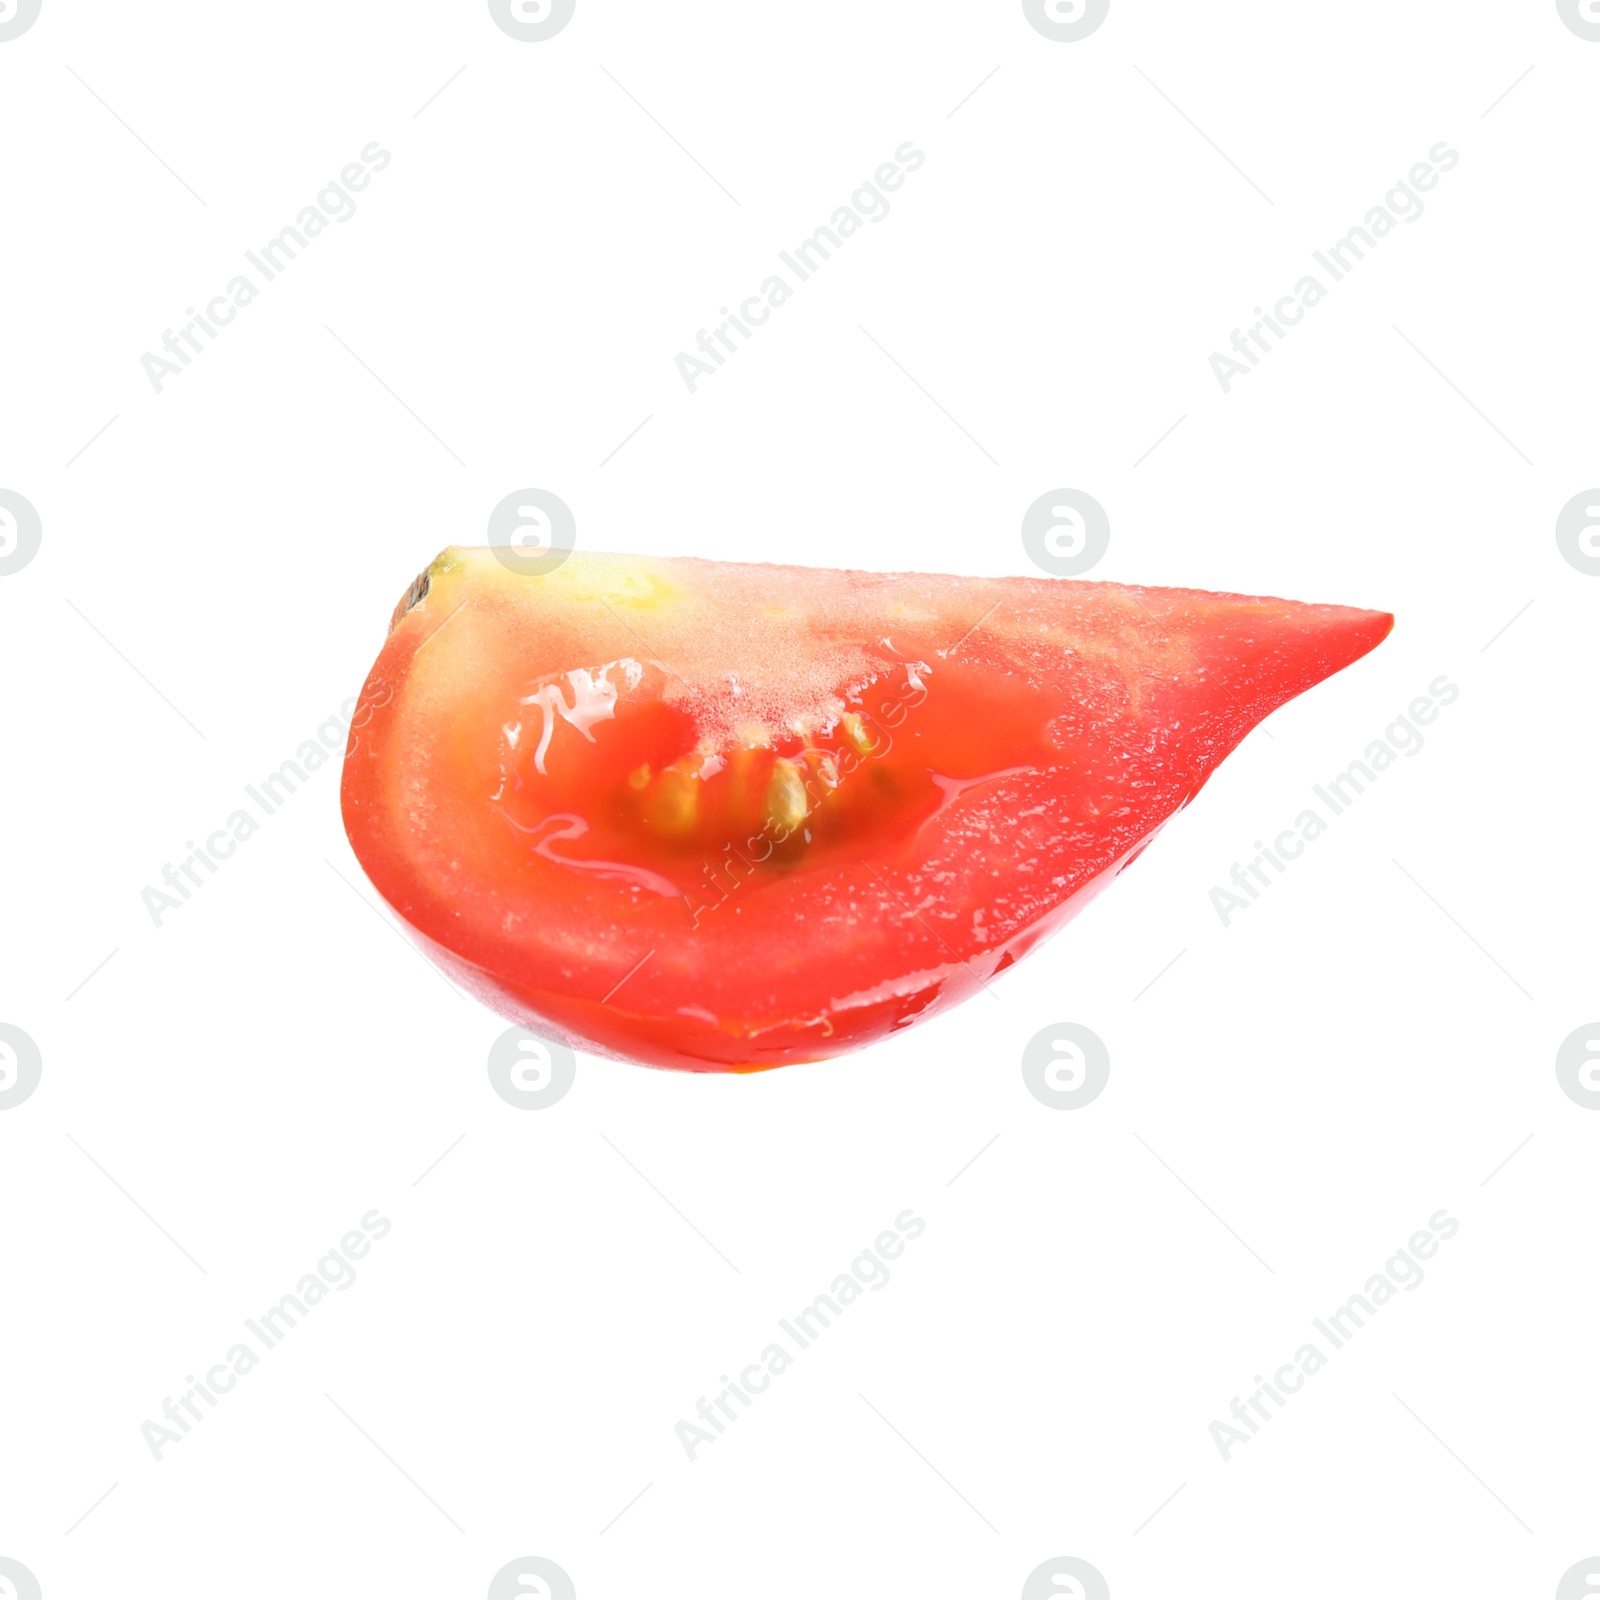 Photo of Piece of ripe red tomato on white background